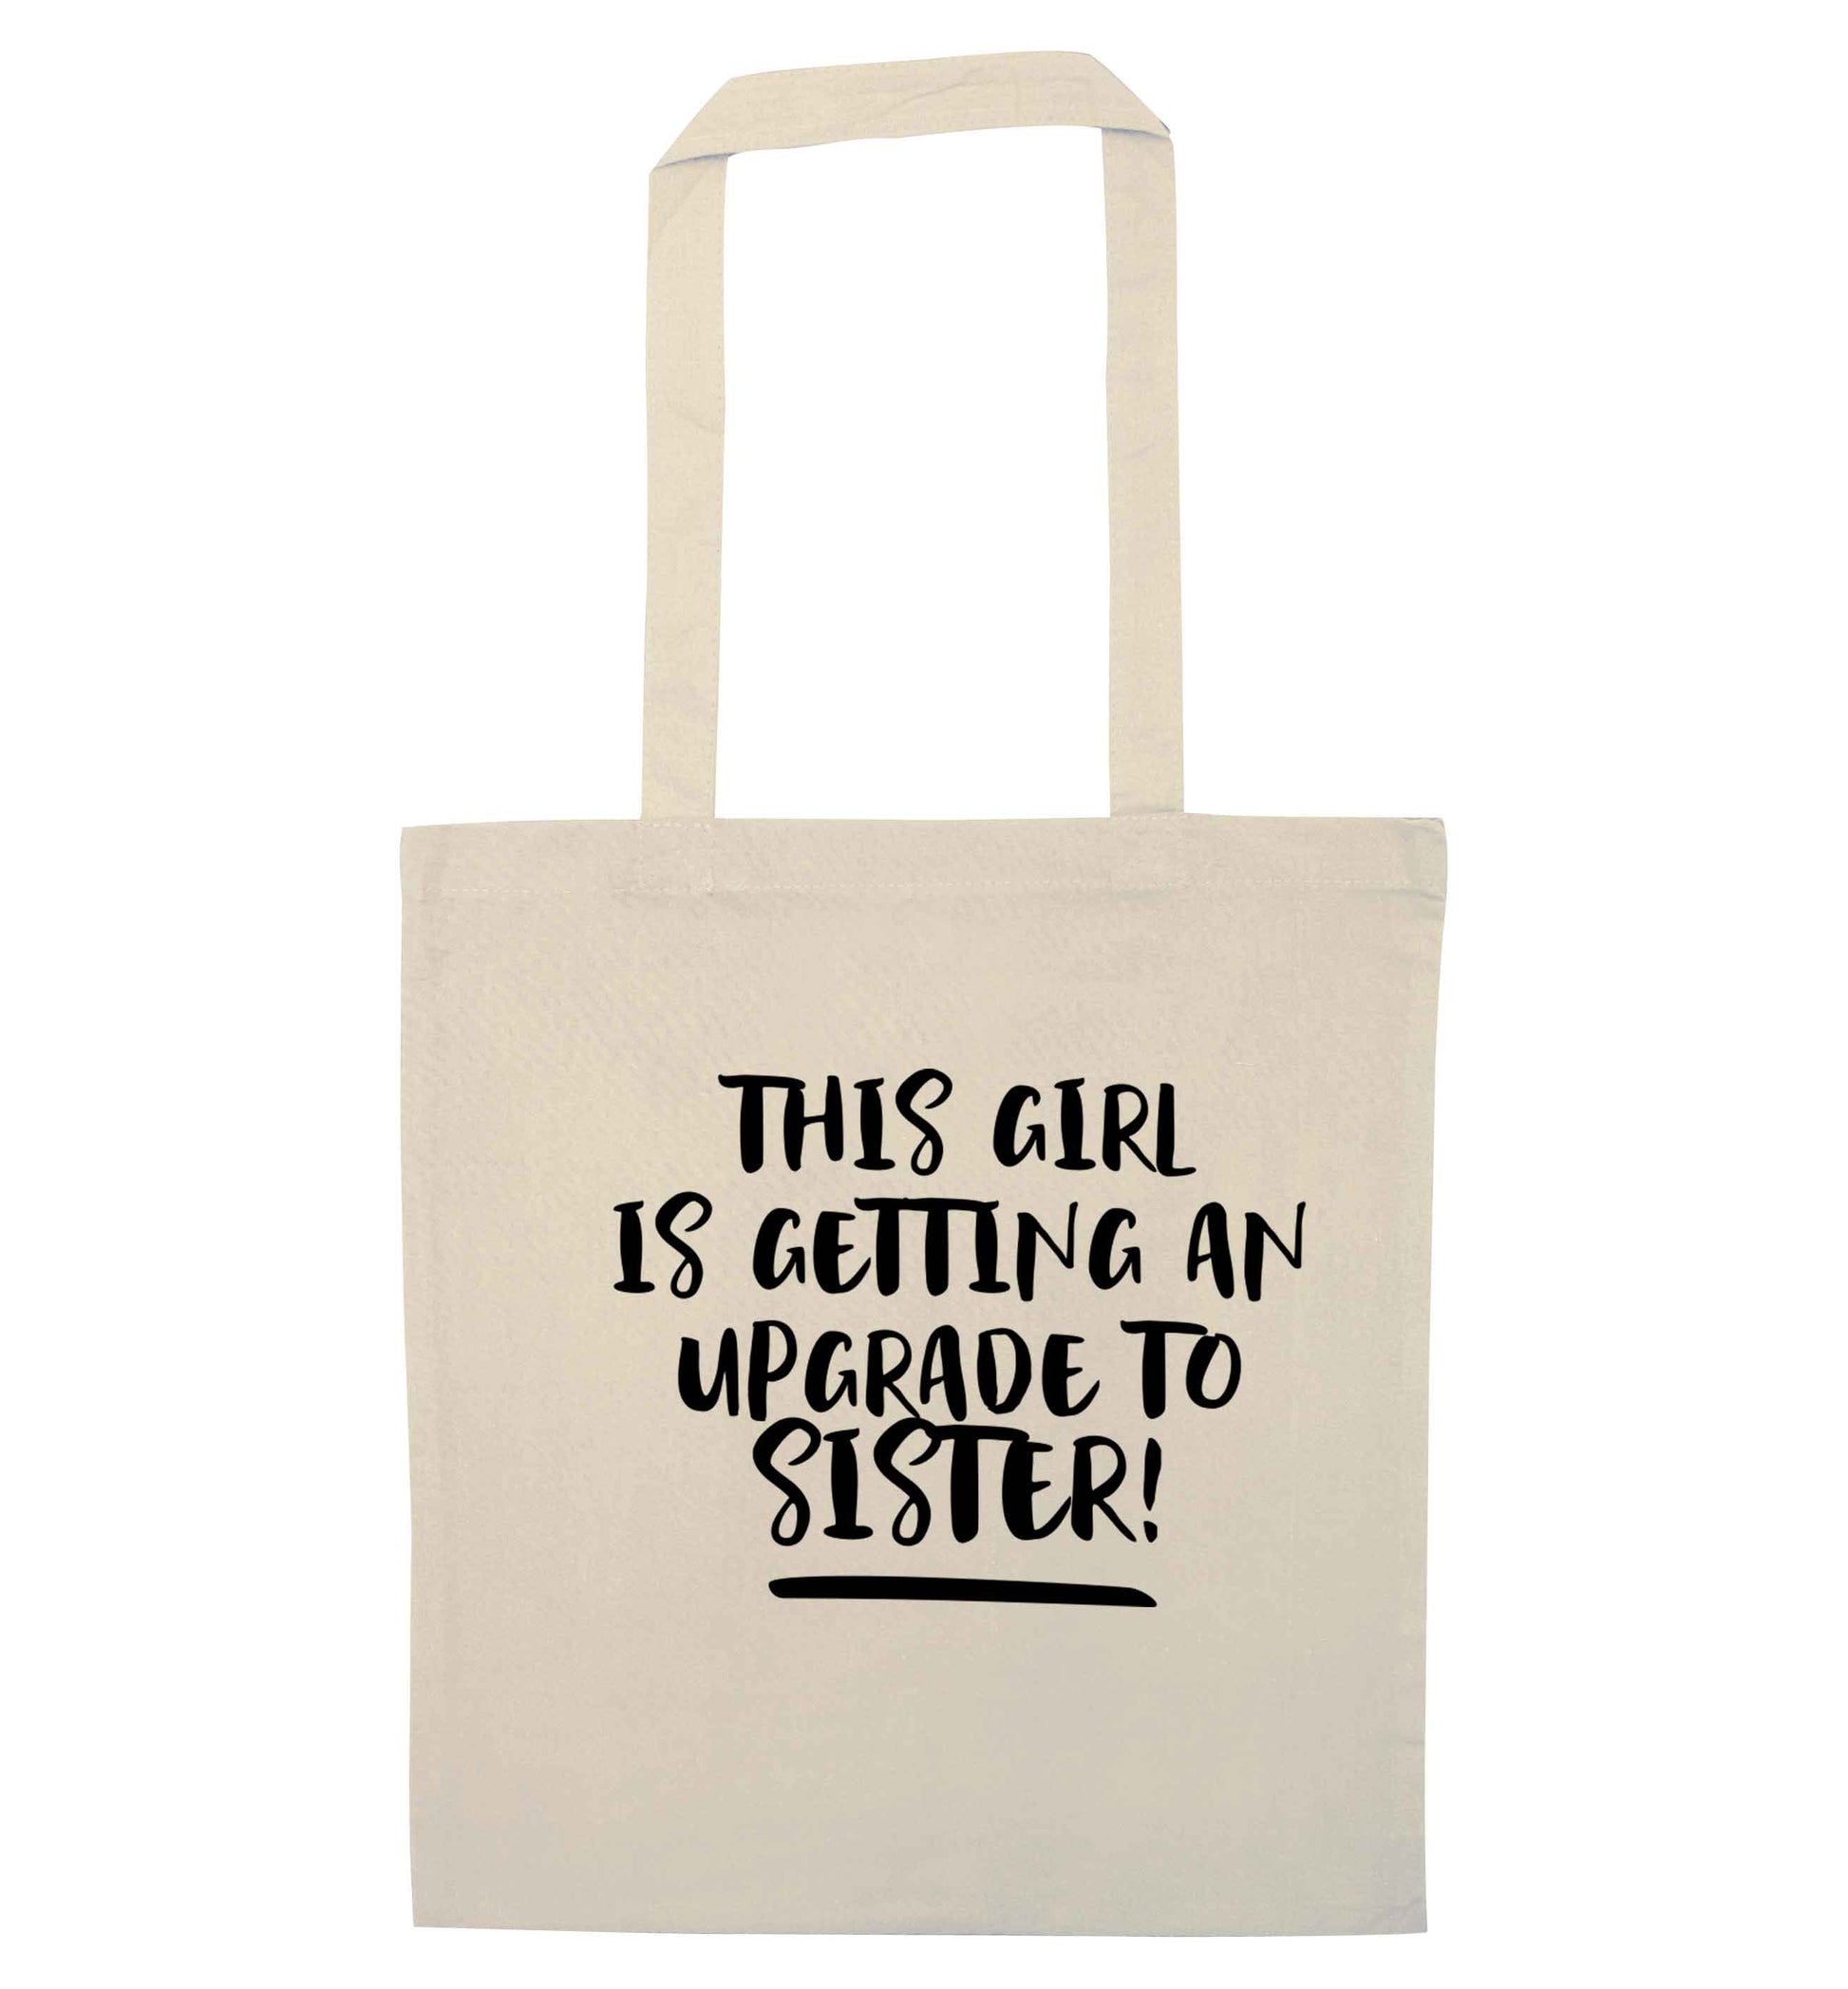 This girl is getting an upgrade to sister! natural tote bag